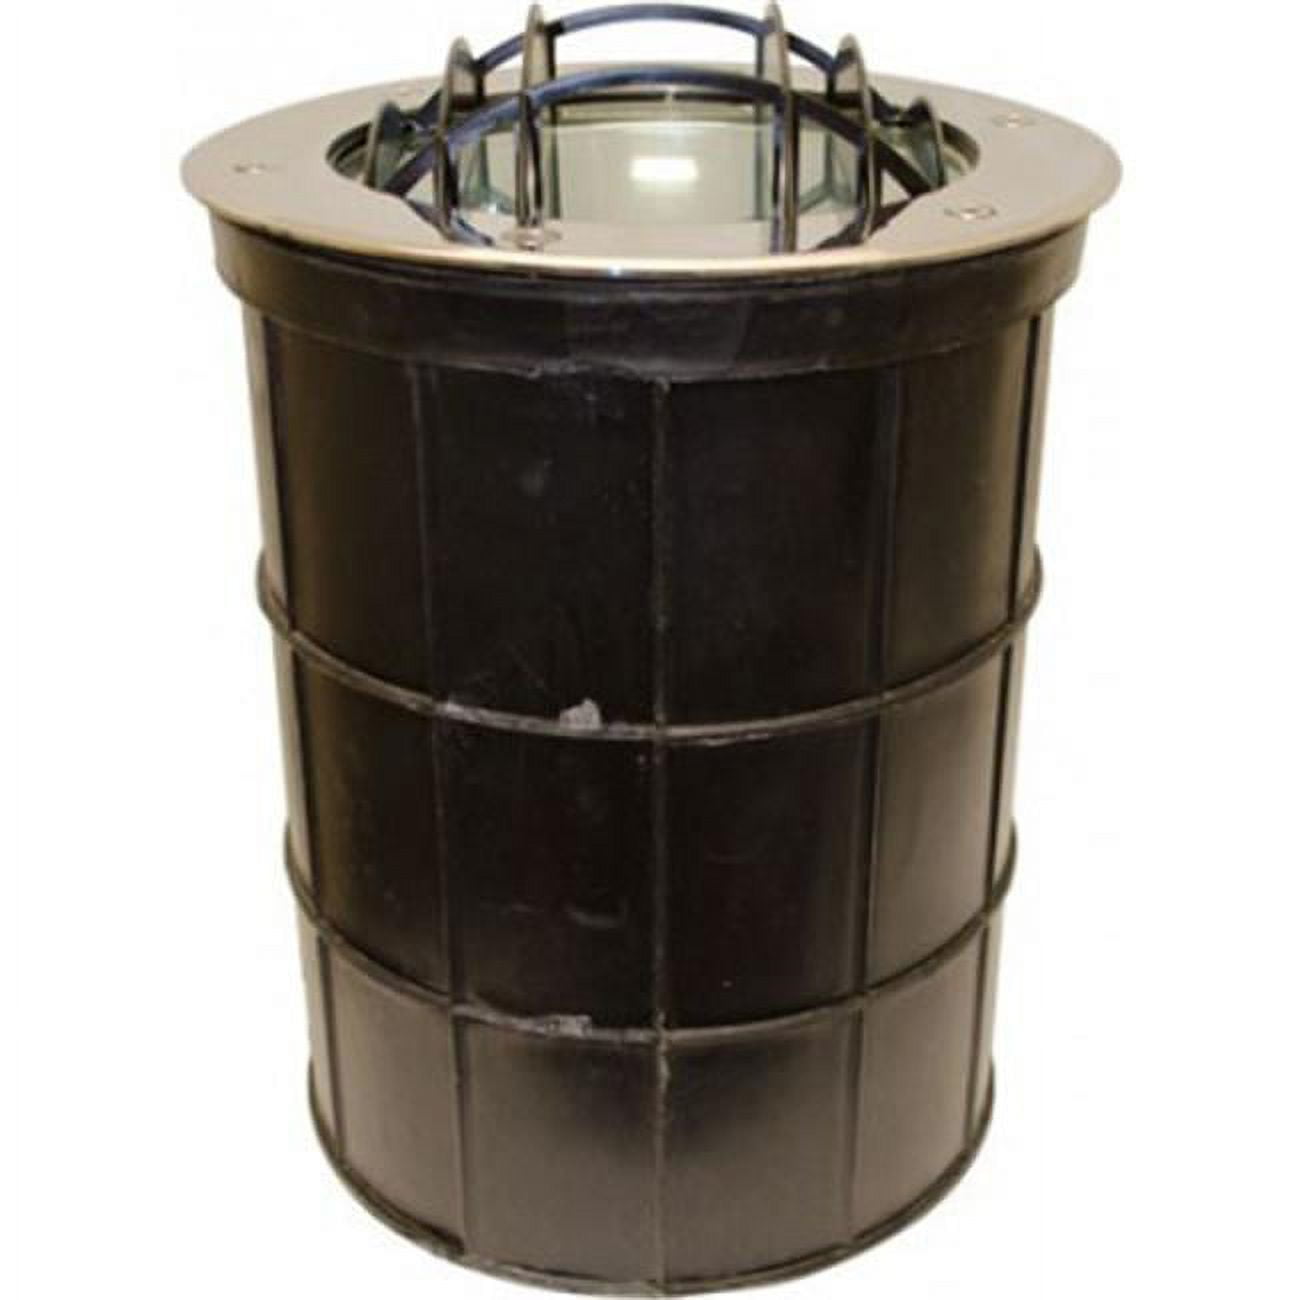 Picture of Dabmar Lighting P-GRL-DW1200 150 watt Stainless Steel Maximum In-Ground Well Light with Grill